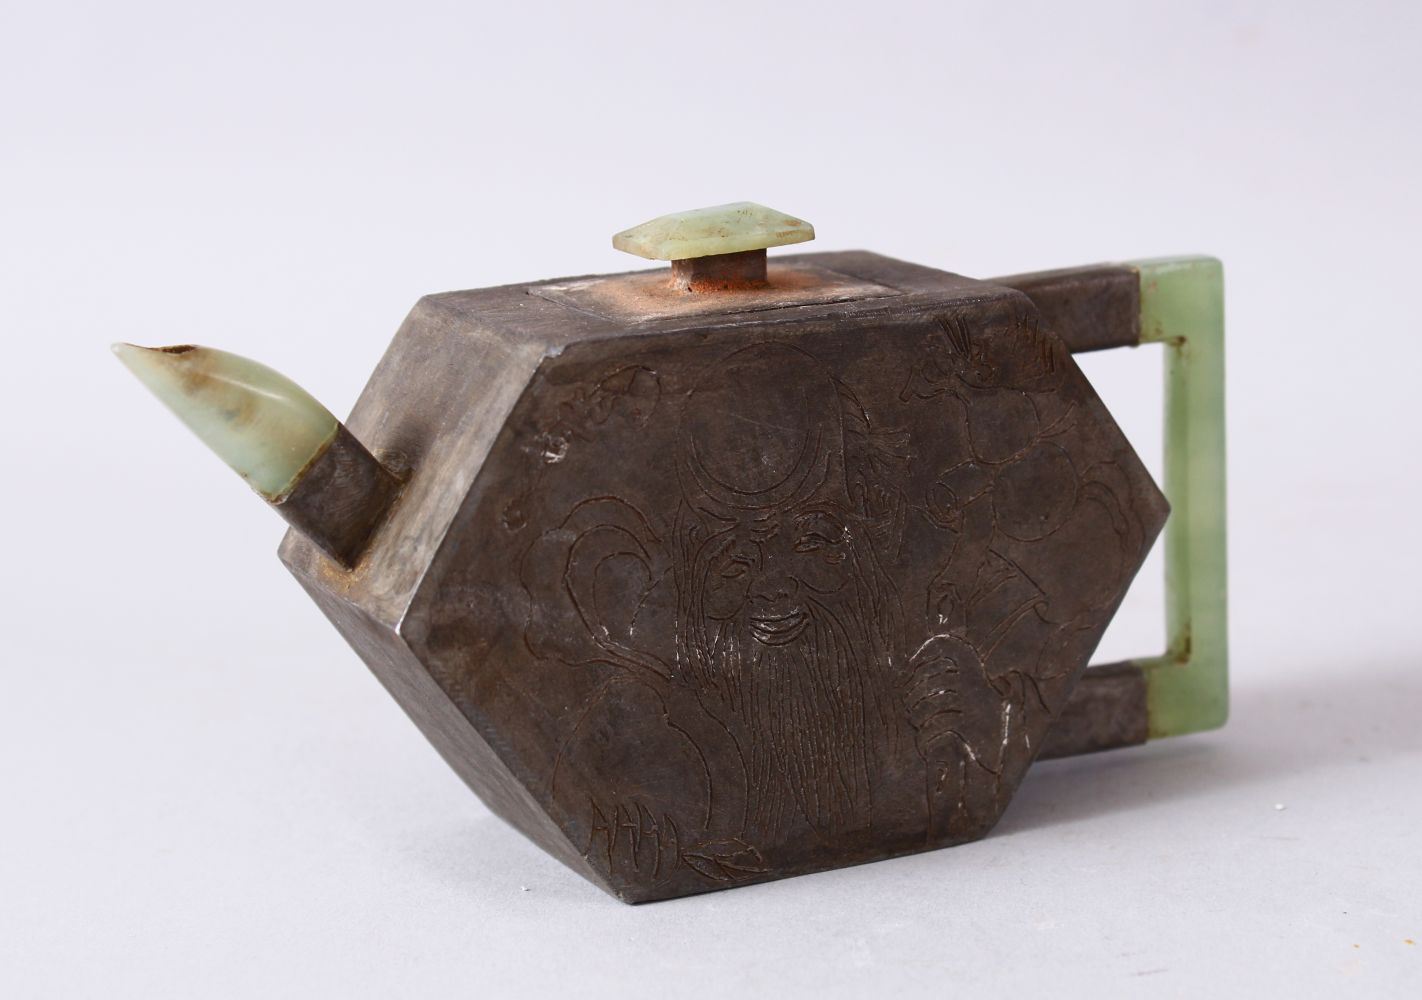 A CHINESE METAL & JADE TEAPOT, the teapot body formed from white metal and carved with scenes of